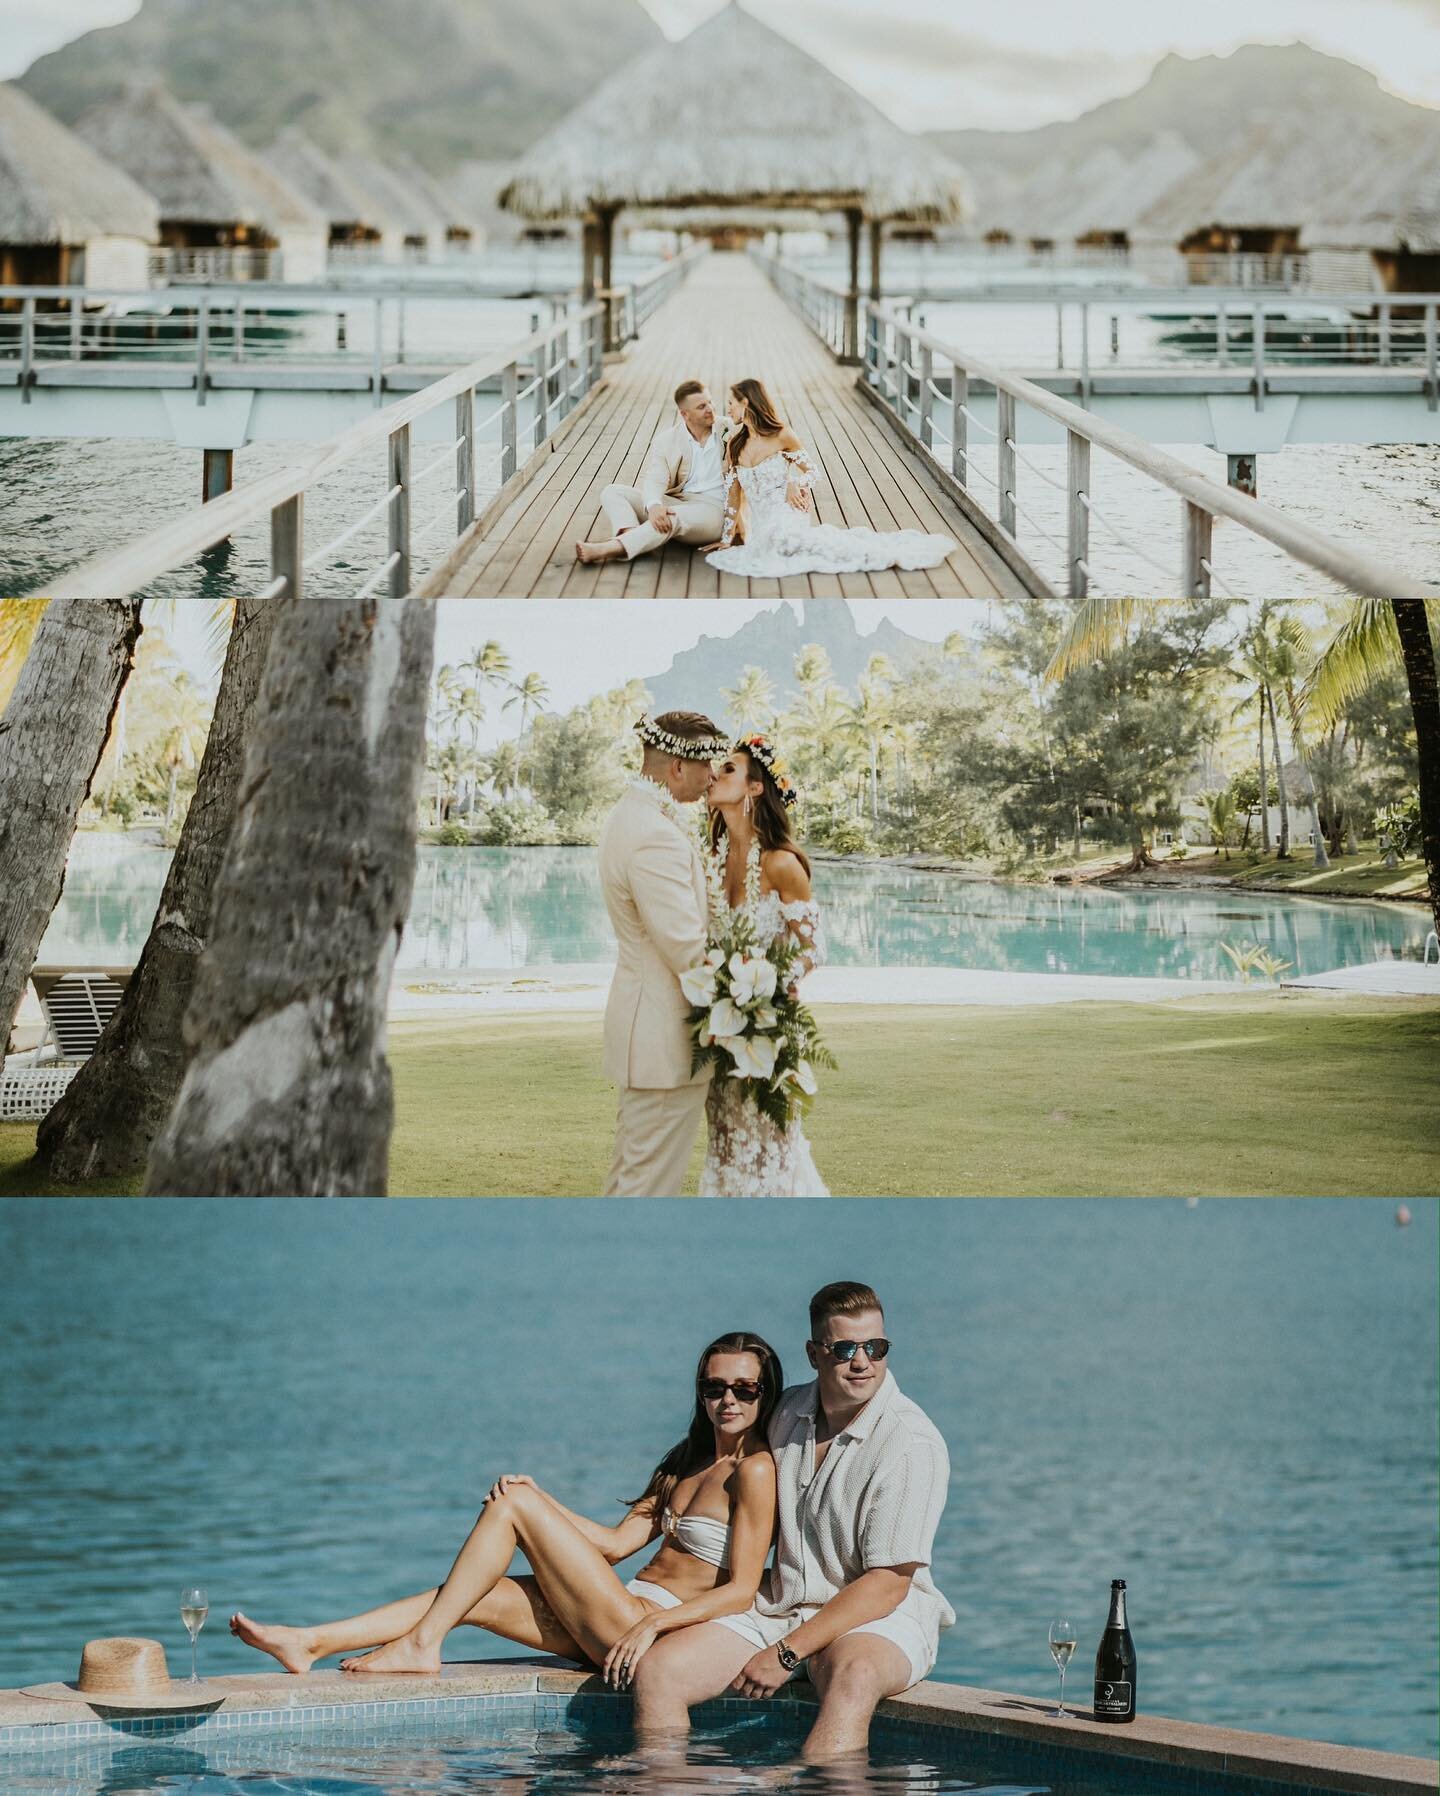 LATELY 🙌🏾 The last couple of months have been a ride for sure and here are a few frames from incredible adventures across Bora Bora, London, Marrakech, Oxfordshire, Spain and Norway 🖤🤙🏾

1. H&amp;F win all the elopement vibes. 

2. Give me the s